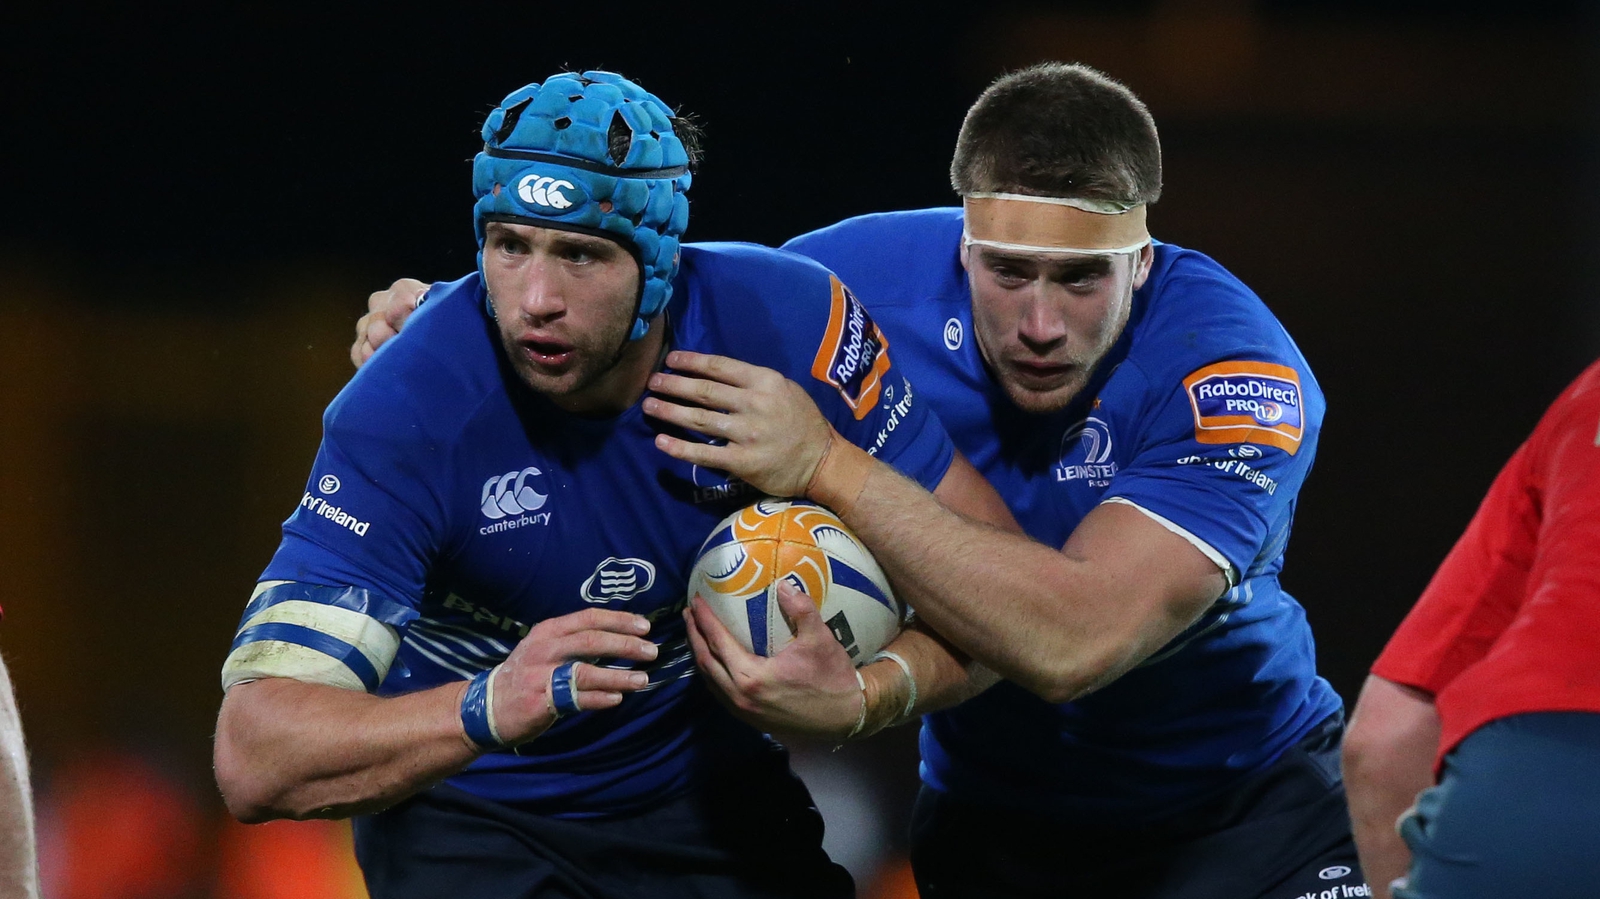 Image - McLoughlin and Ryan in action together for Leinster